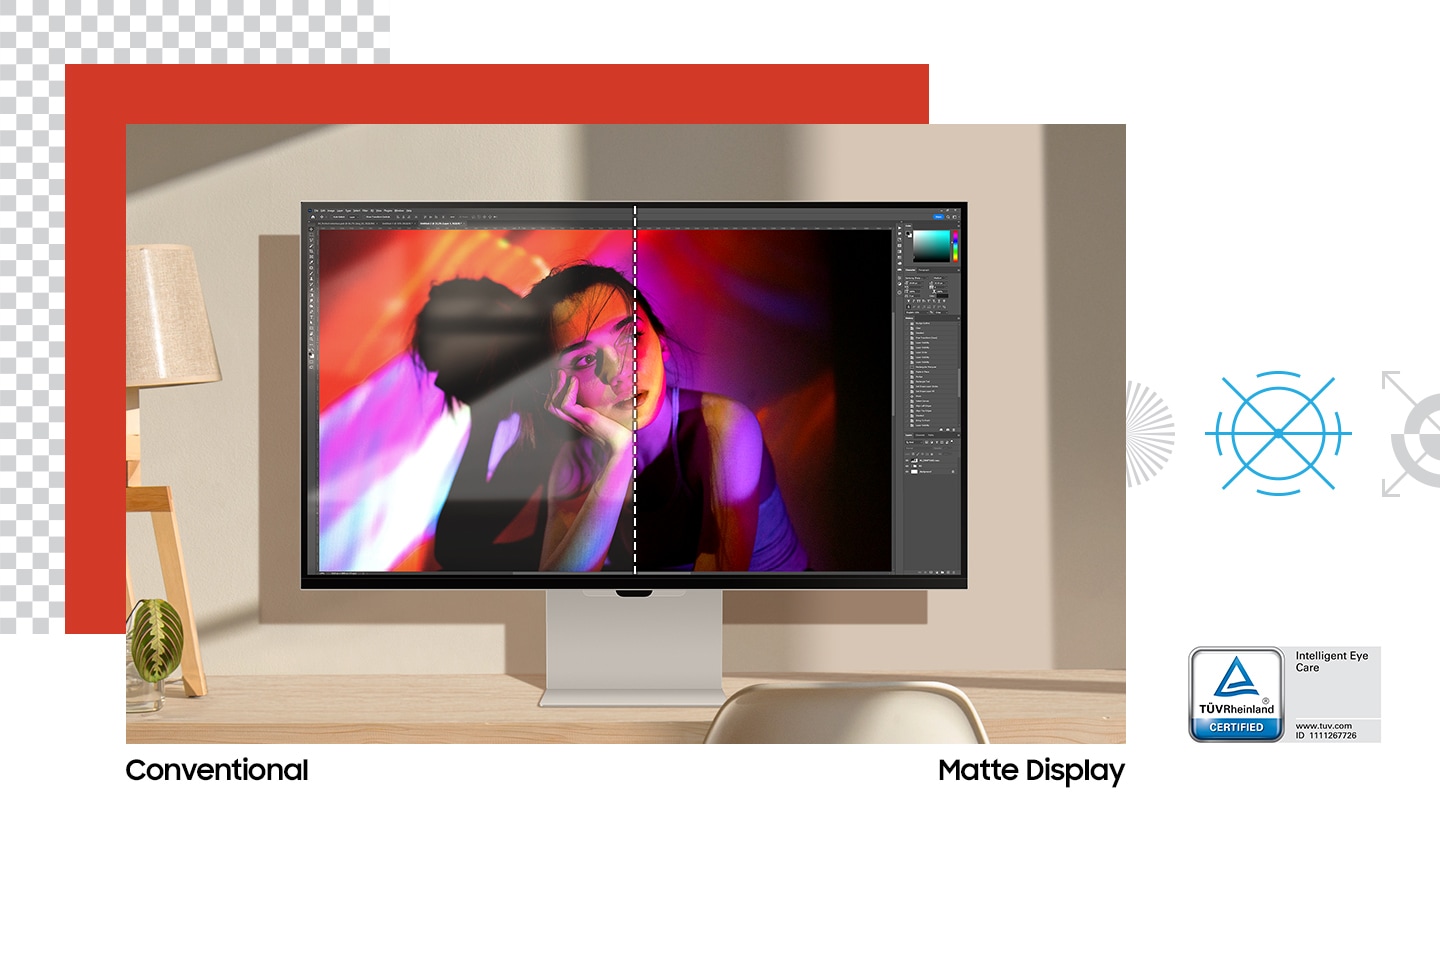 There is a monitor and TUV certification mark. Some objects in front of the monitor are reflected on the screen and a colorful image appears with 'conventional' text. It gets clearer with 'Matte Display' text. Lastly, the screen is divided in half showing both conventional and the matte display.